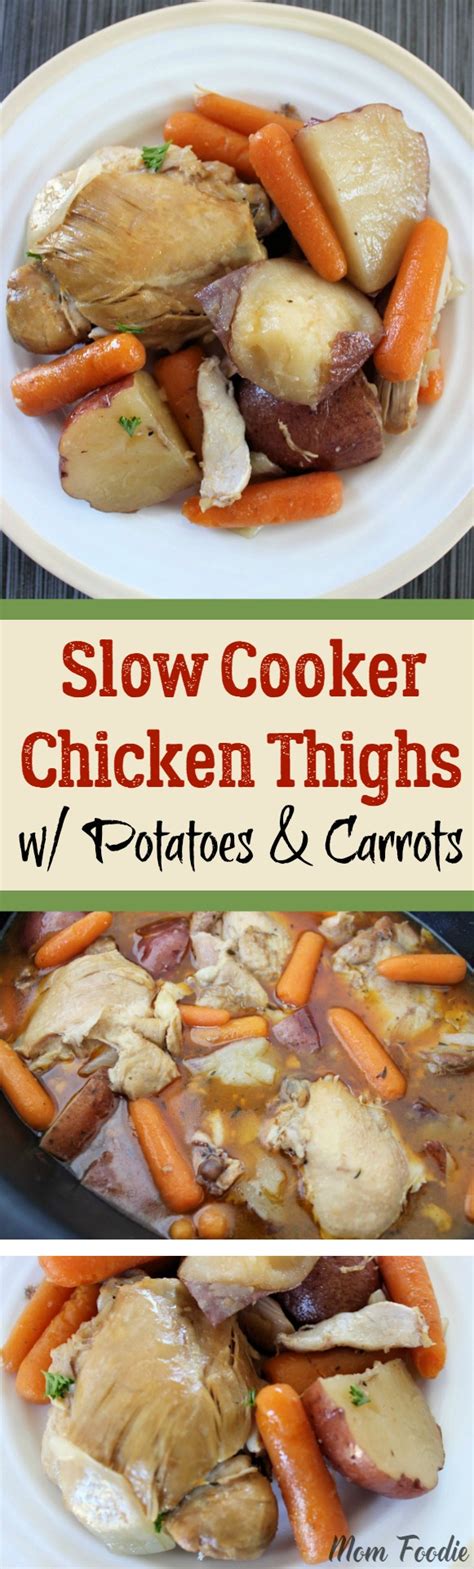 This is an easy slow cooker recipe for chicken thighs in a sauce made with soy sauce, ketchup i thickened the sauce with cornstarch. Slow Cooker Chicken Thighs with Potatoes and Carrots - Mom Foodie